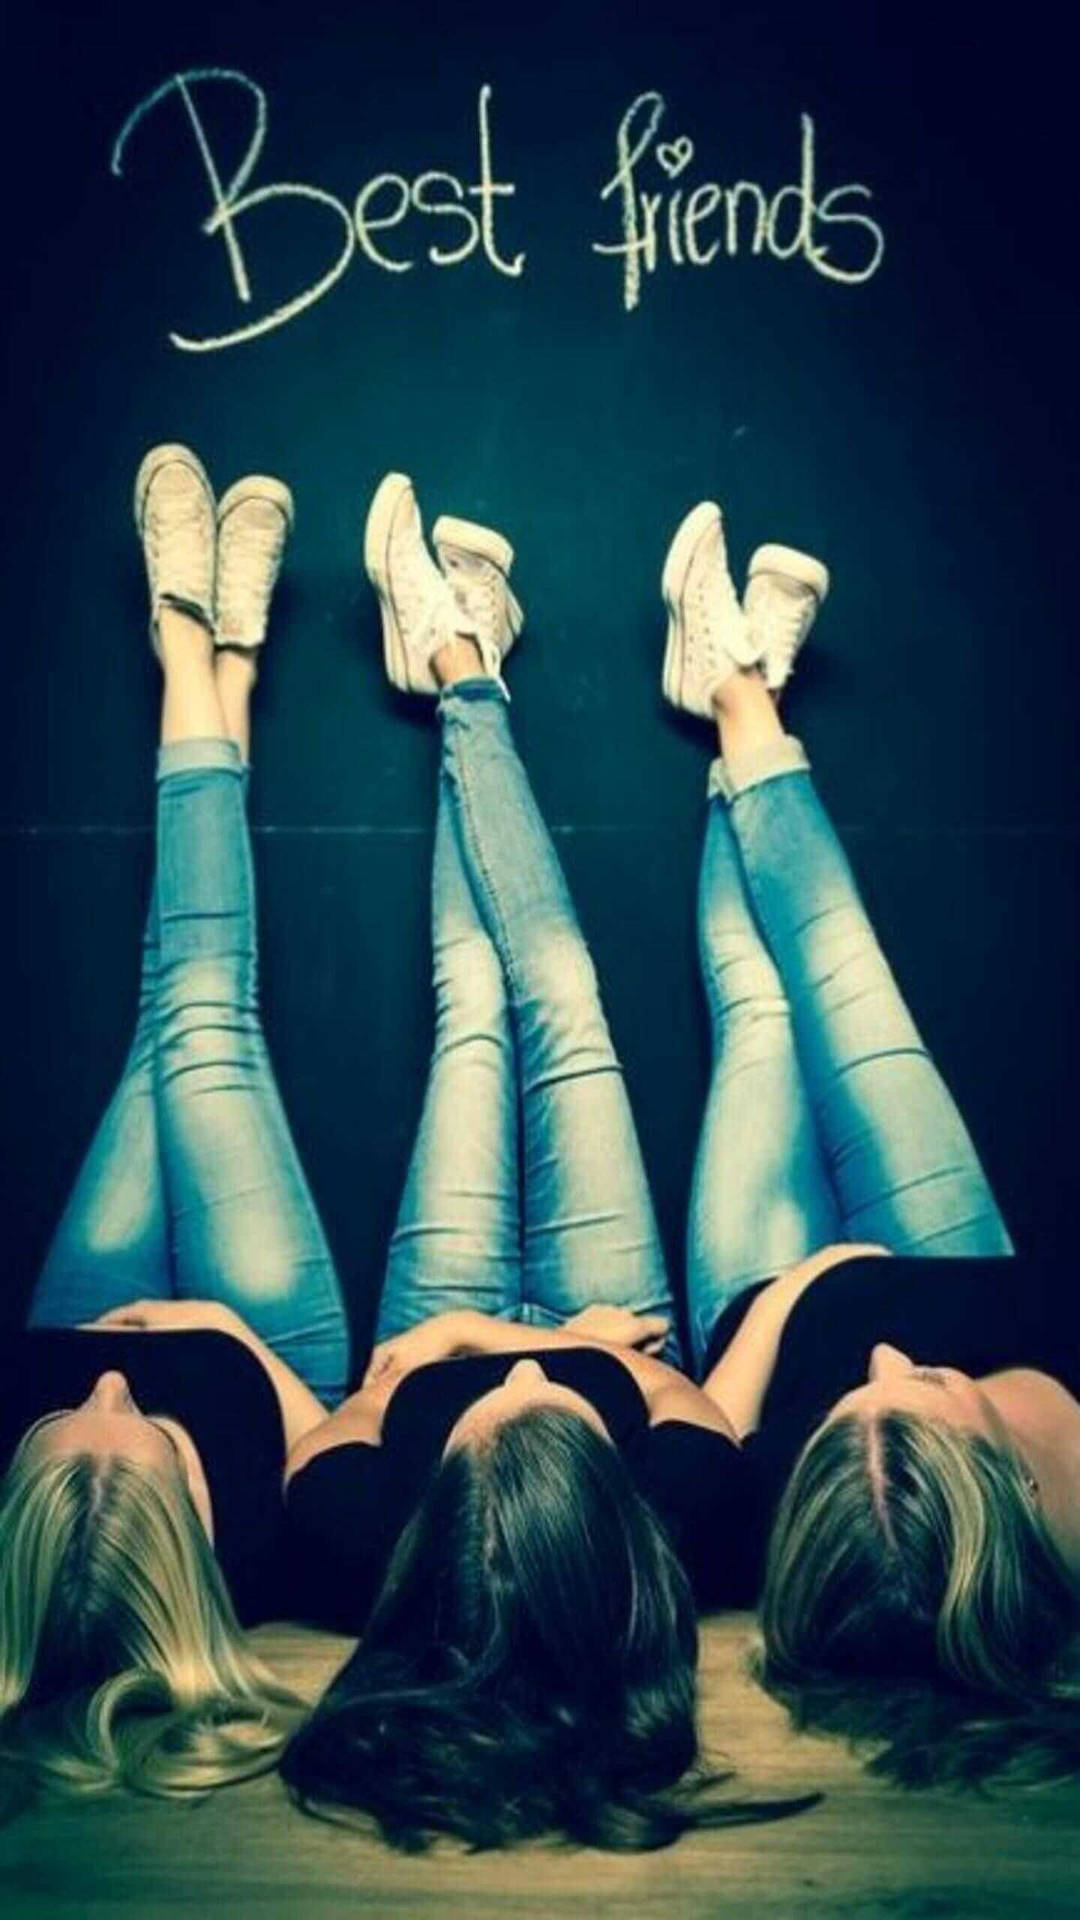 3 Best Friends Feet Leaning On The Wall Background